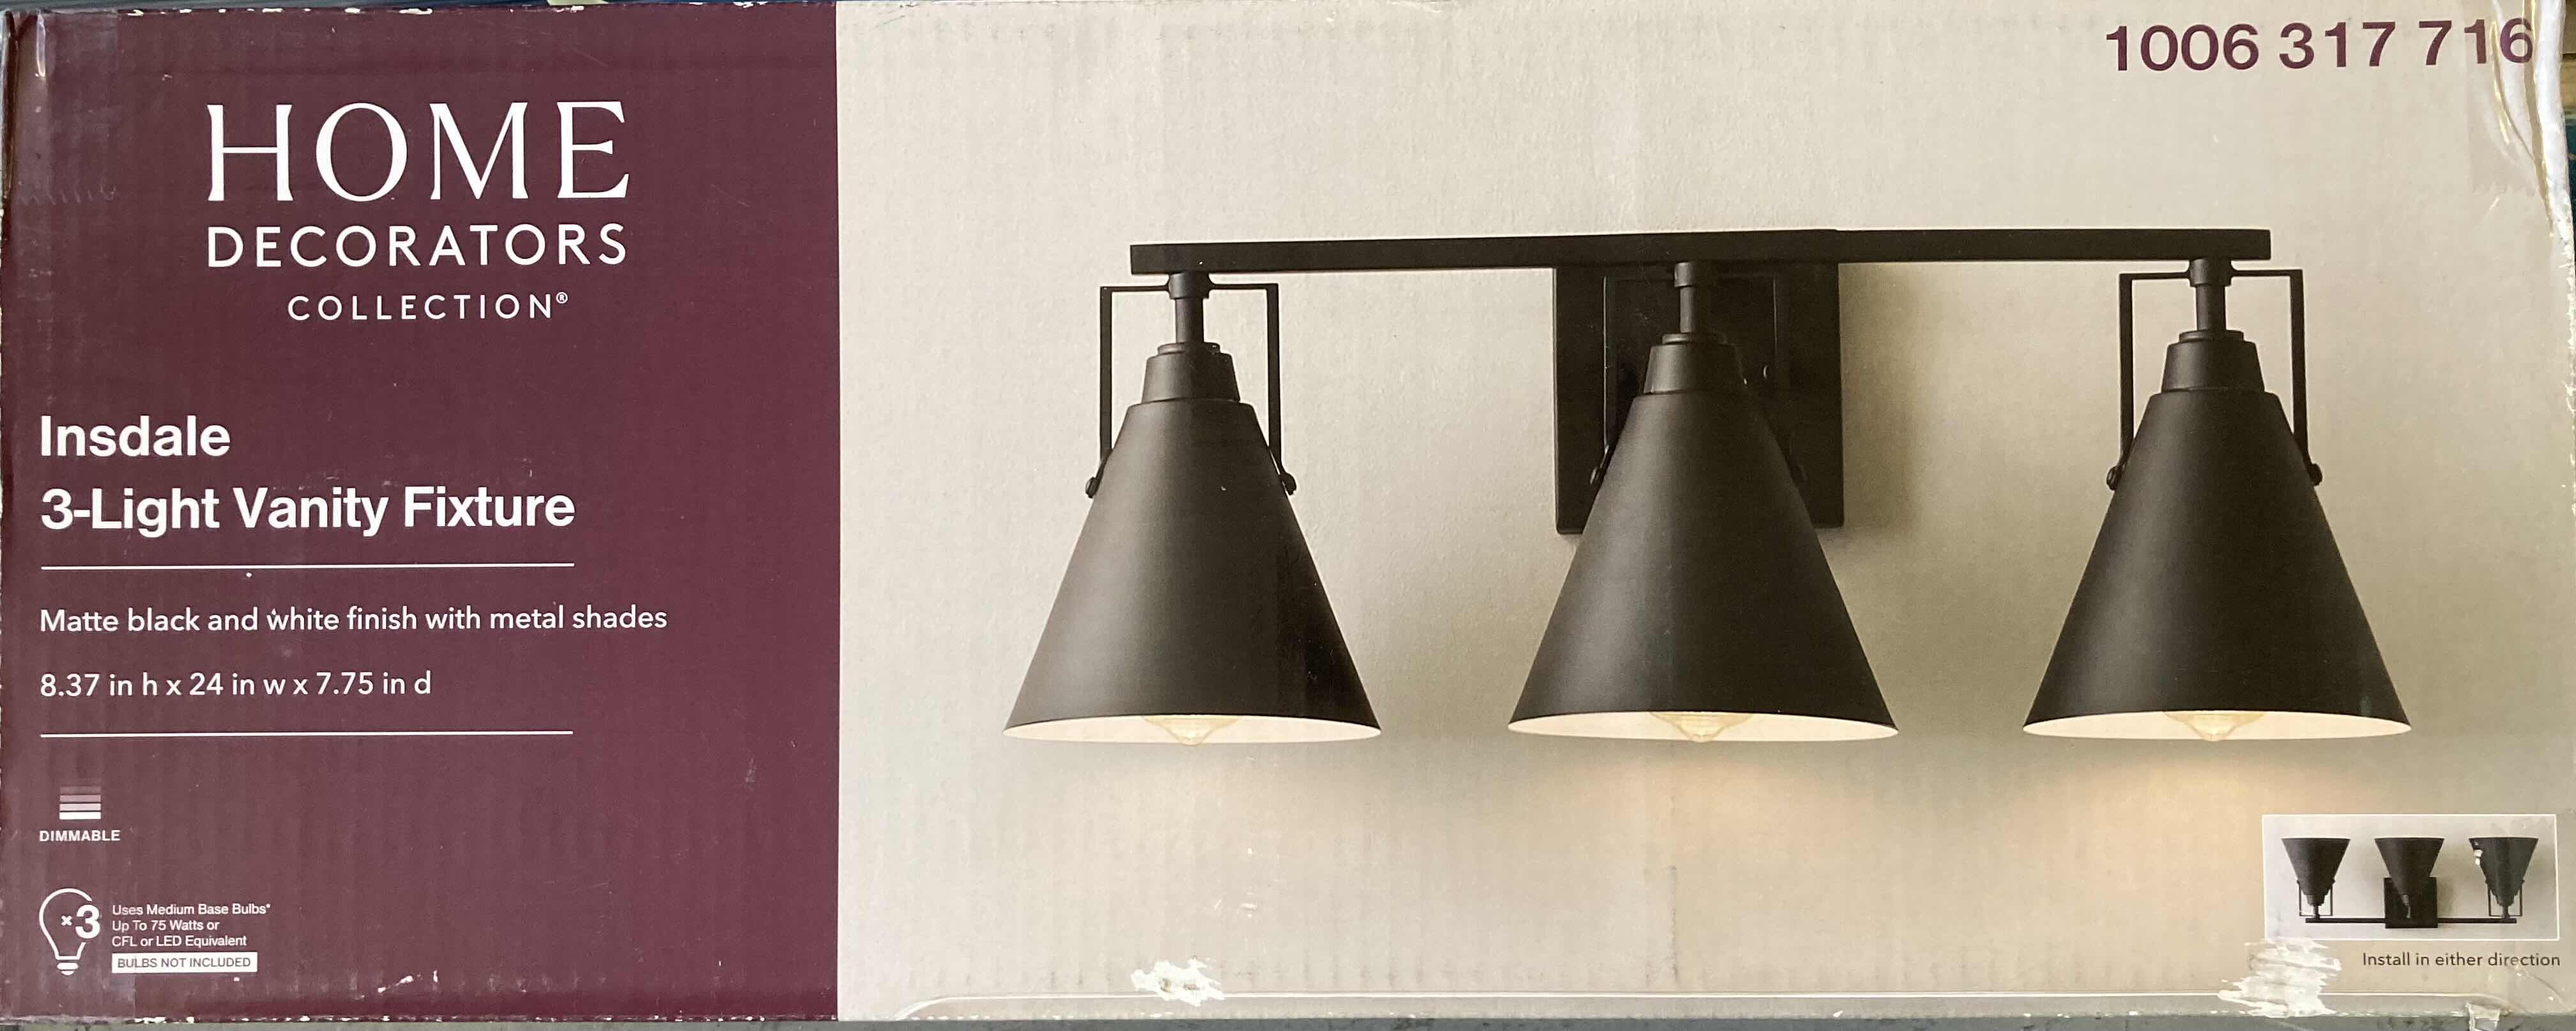 Photo 5 of HOME DECORATORS COLLECTION MATTE BLACK FINISH INSDALE 3 LIGHT METAL SHADE VANITY FIXTURE LIGHT 1006317716  24” X 7.75” H8.38”